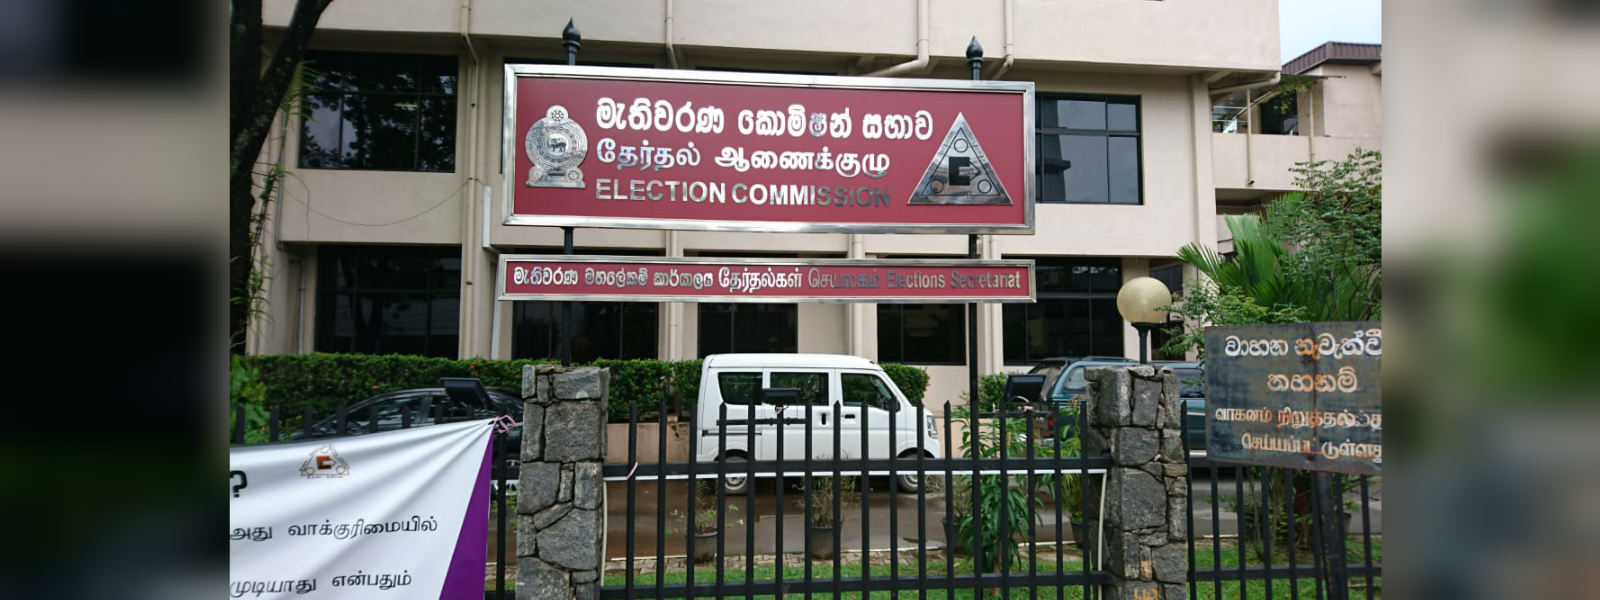 3729 election related complaints lodged: NEC